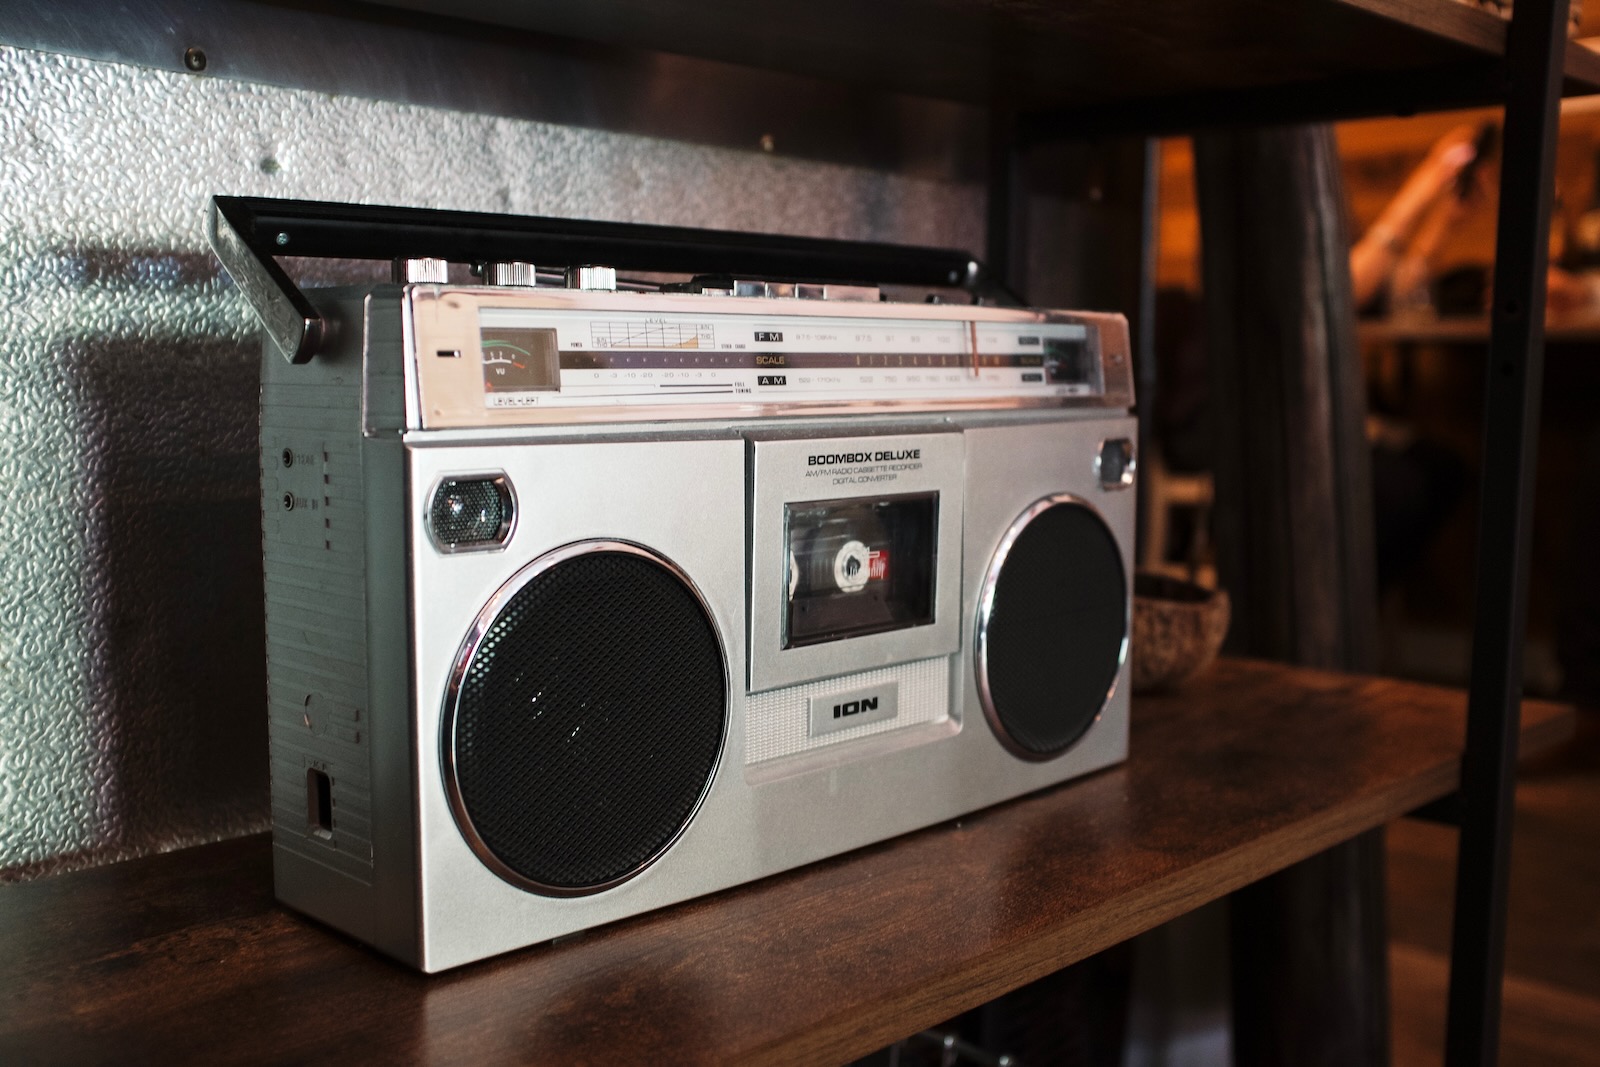 A silver boombox with a single cassette deck and a rotary radio tuner.